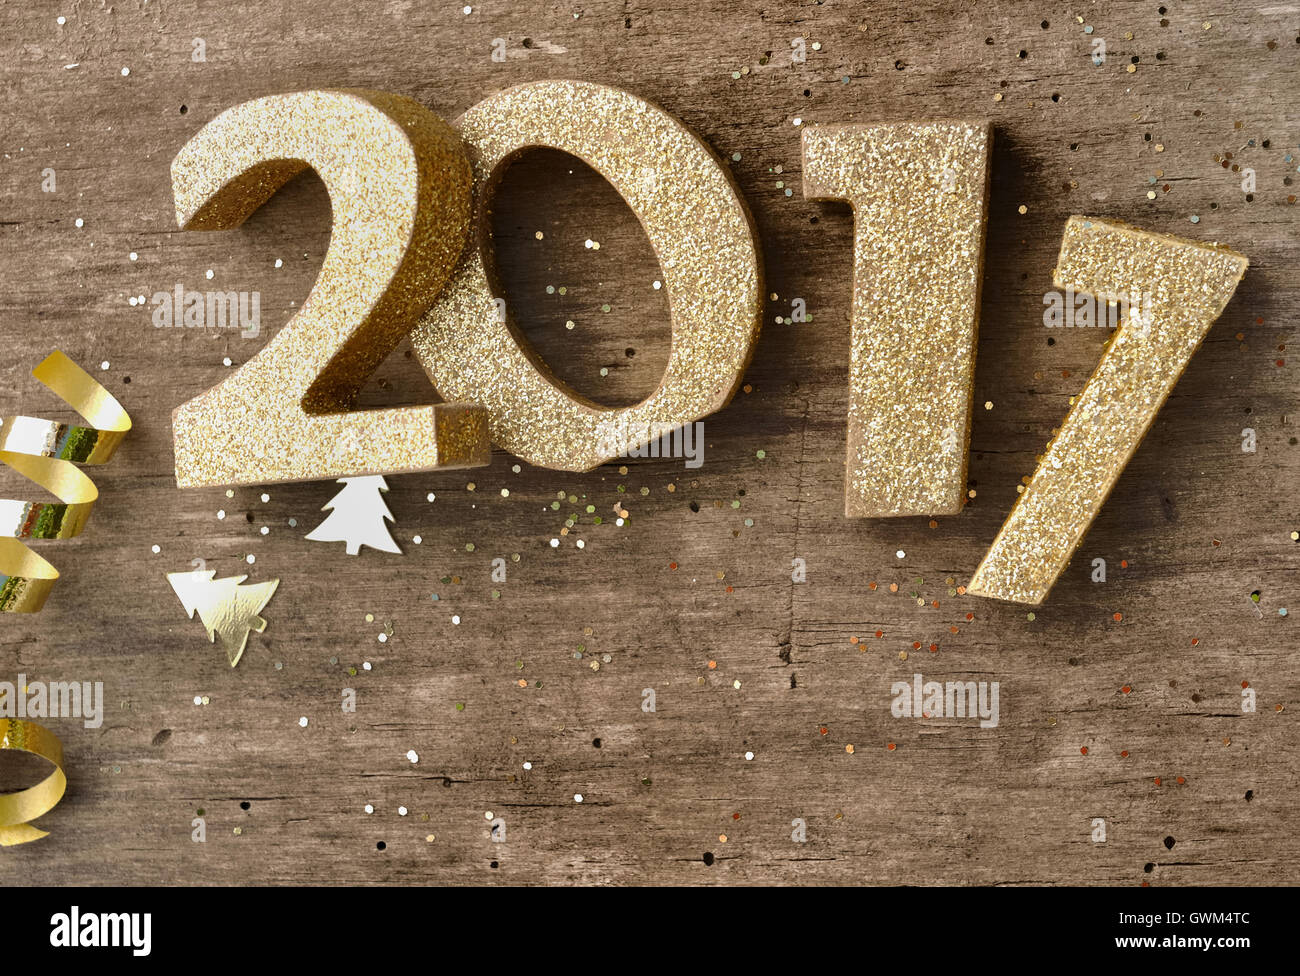 golden 2017 figures with glitter on wooden background Stock Photo